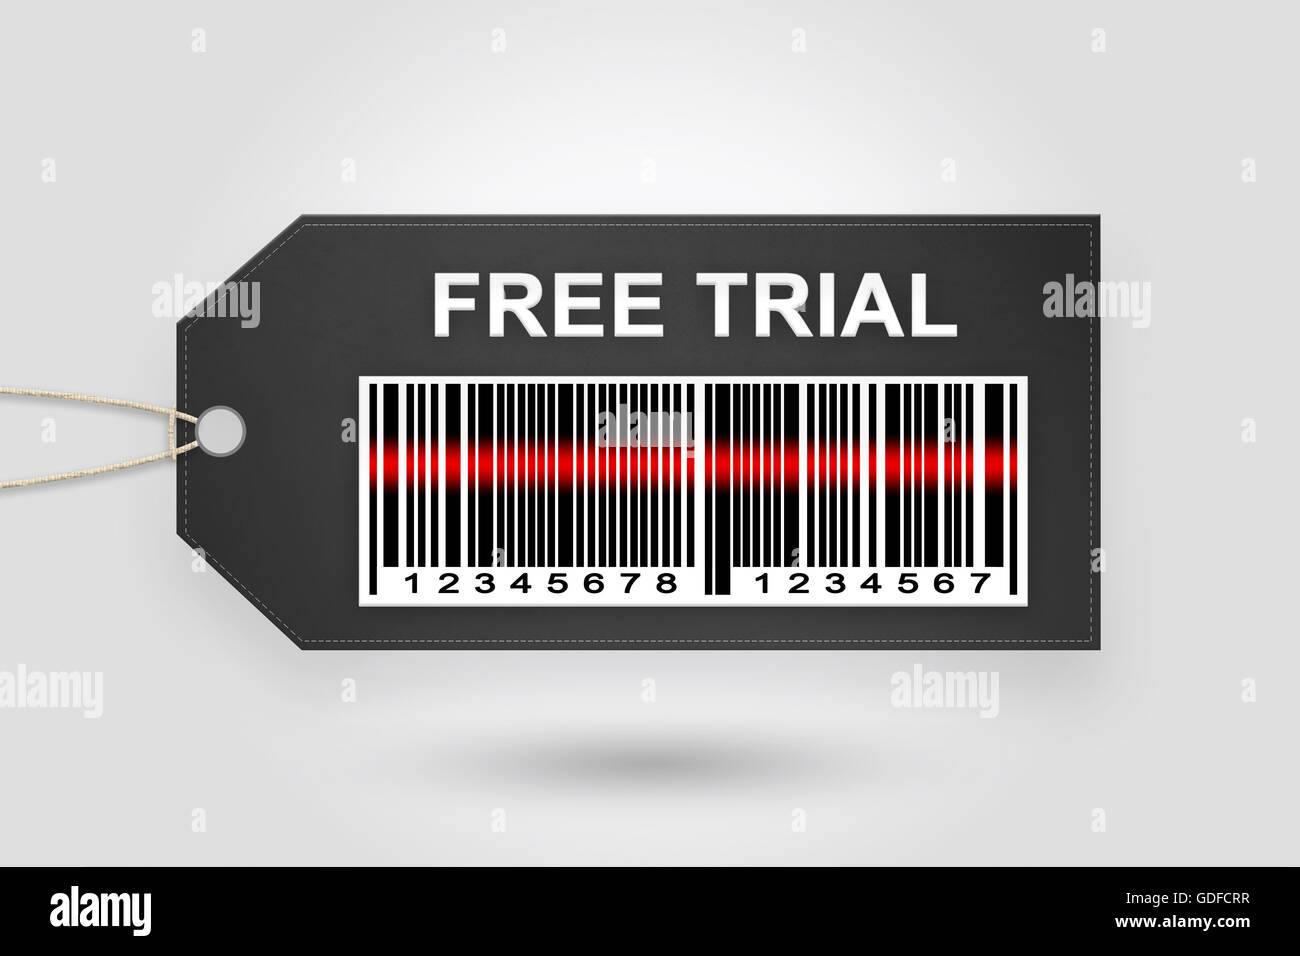 Free trial price tag with barcode and grey radial gradient background Stock Photo